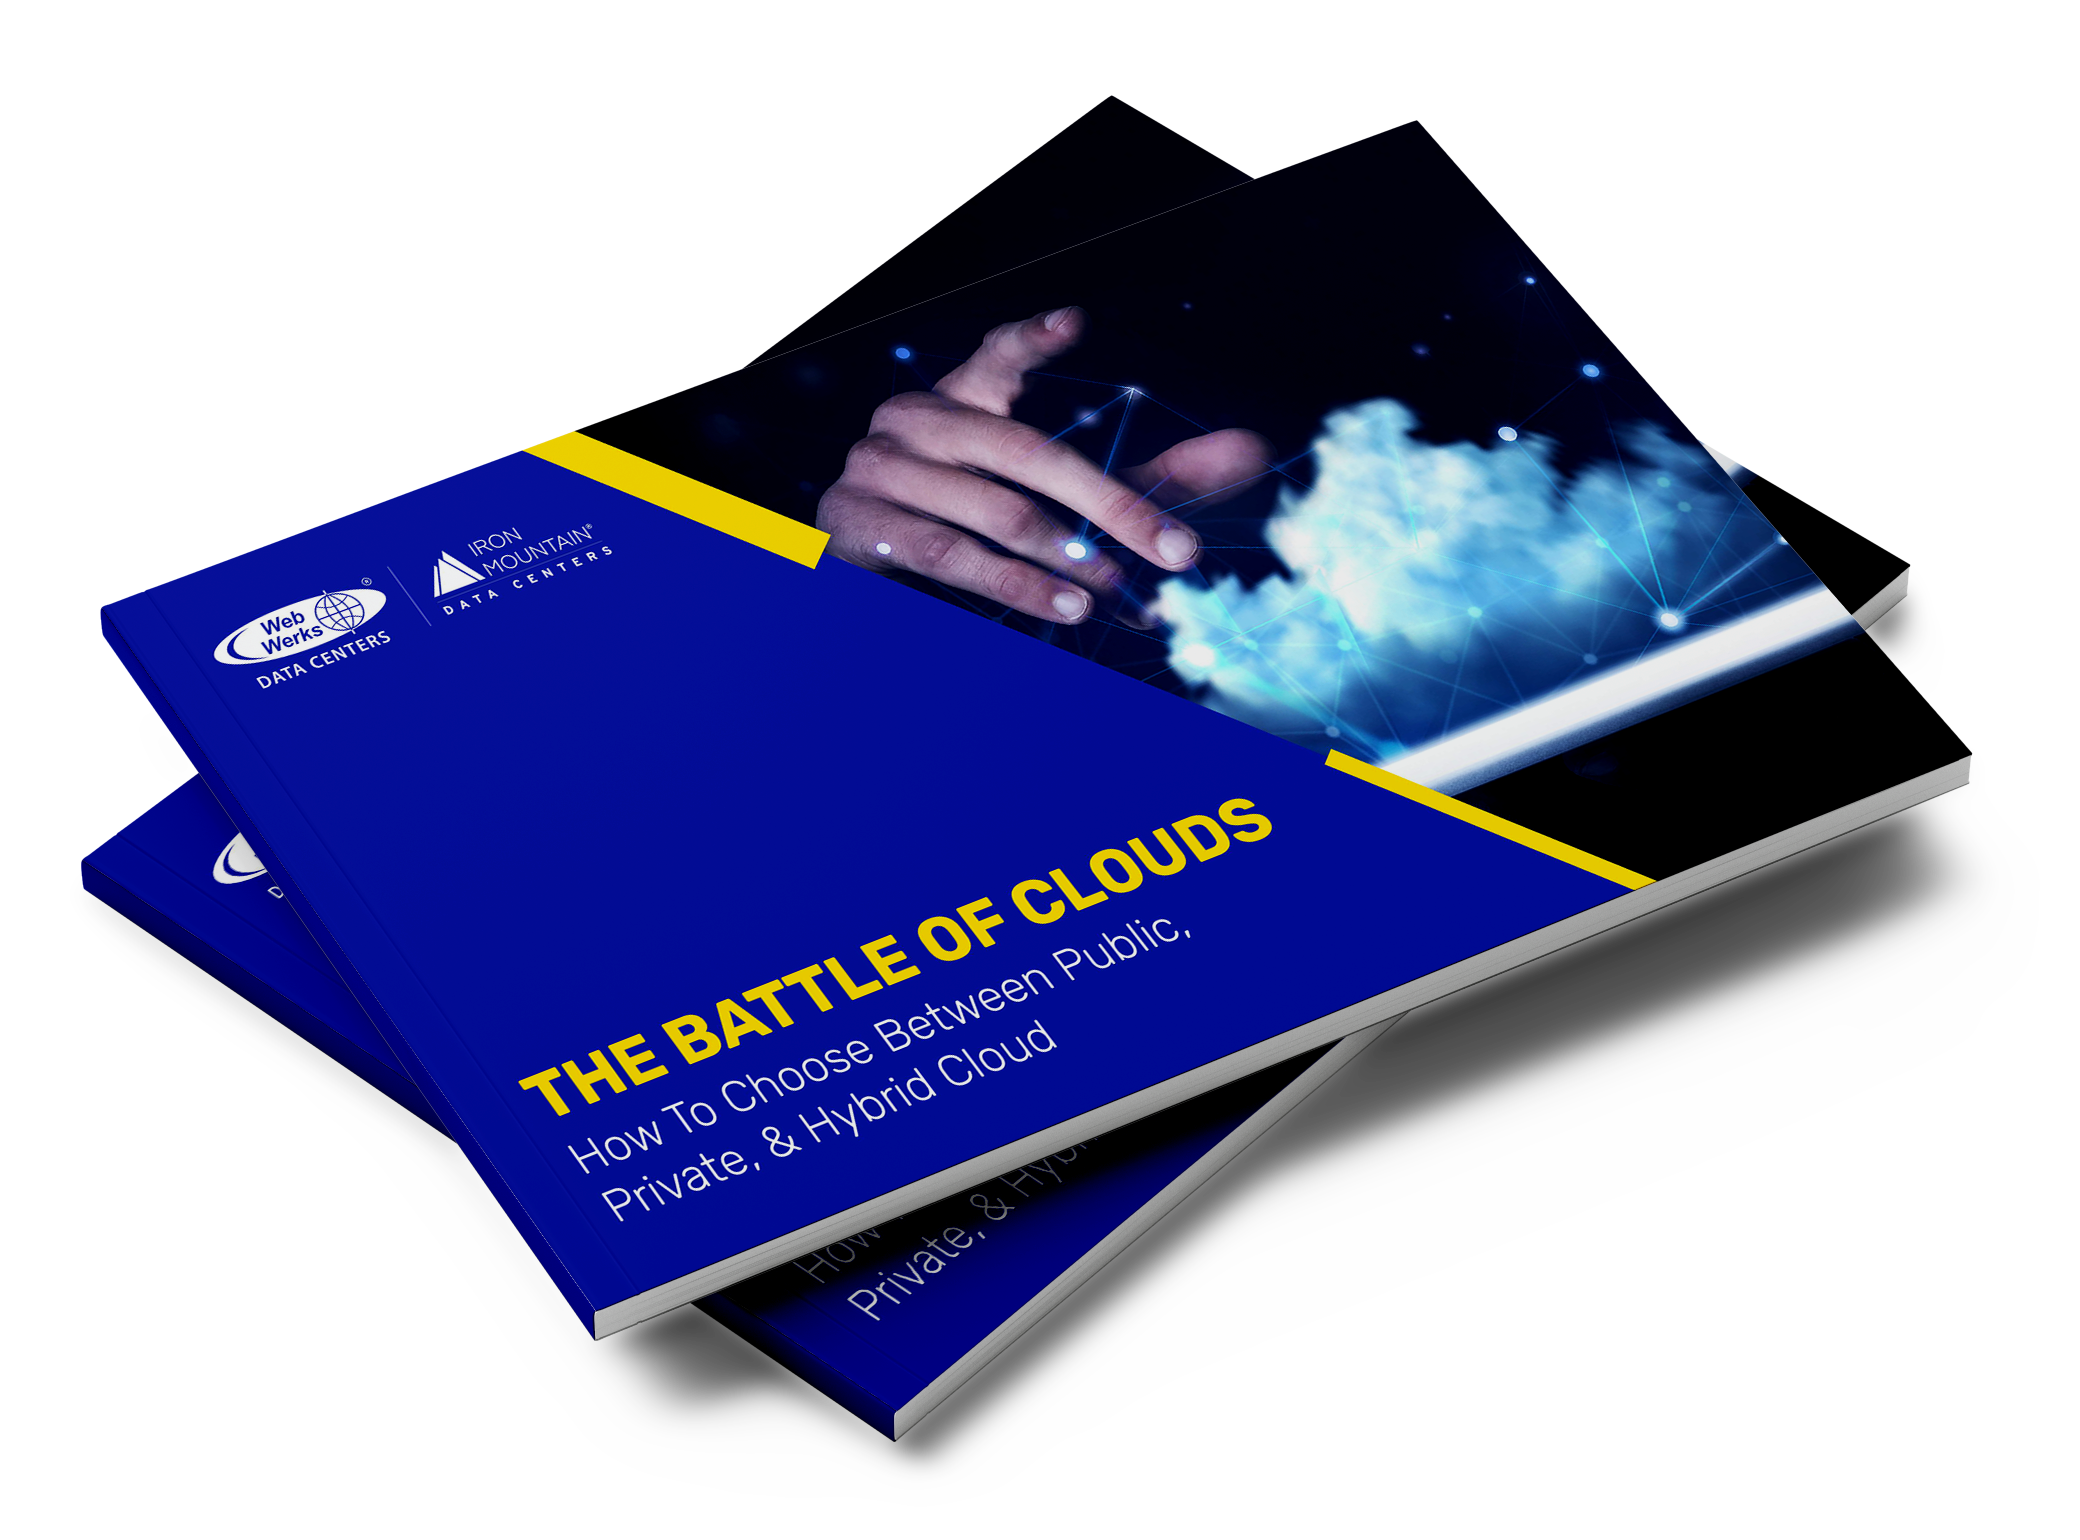 The Battle of Clouds - How To Choose Between Public, Private, and Hybrid Cloud